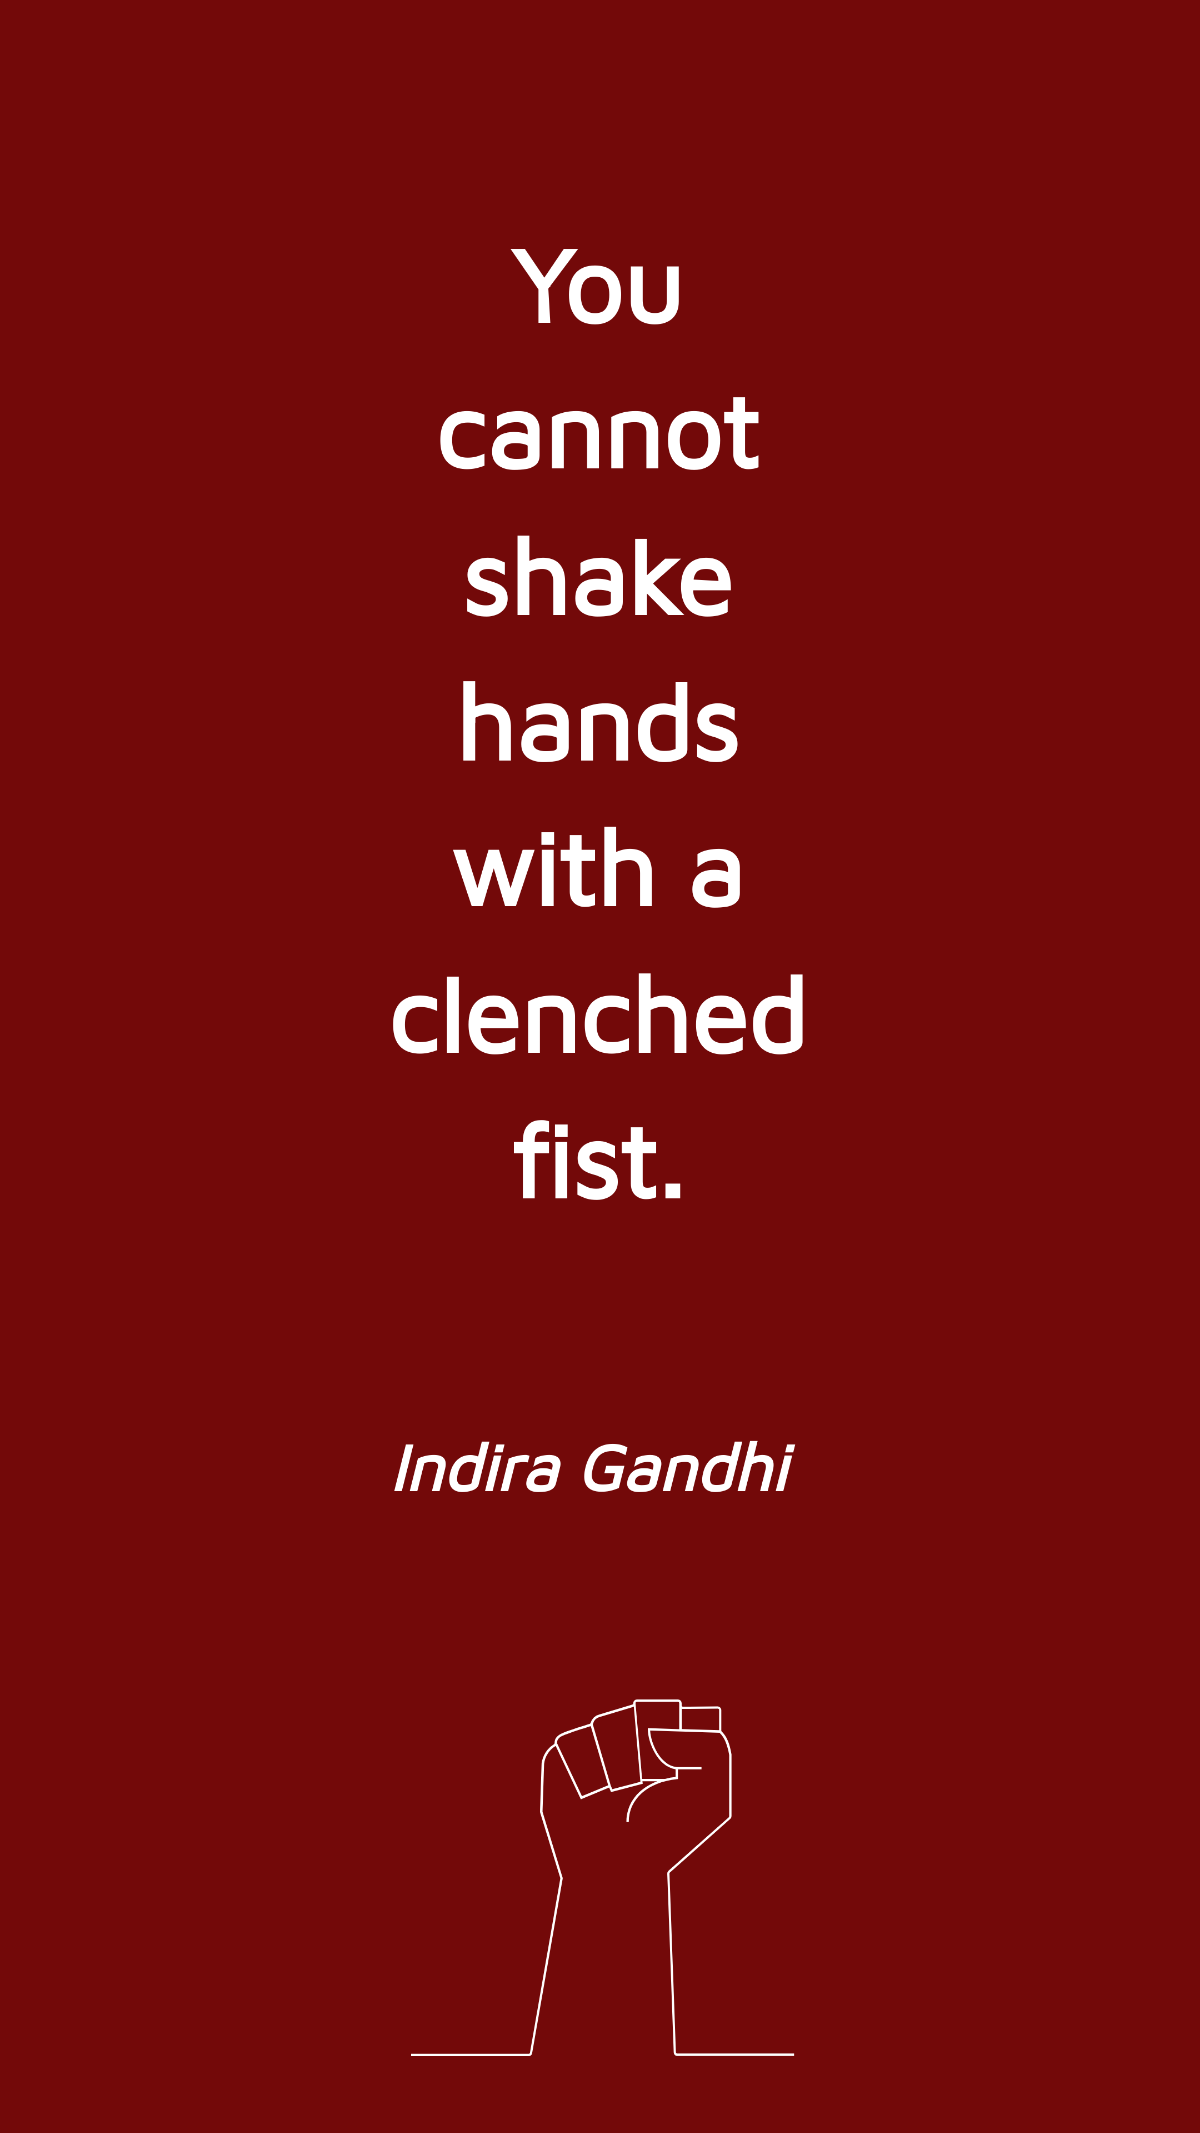 Indira Gandhi - You cannot shake hands with a clenched fist.